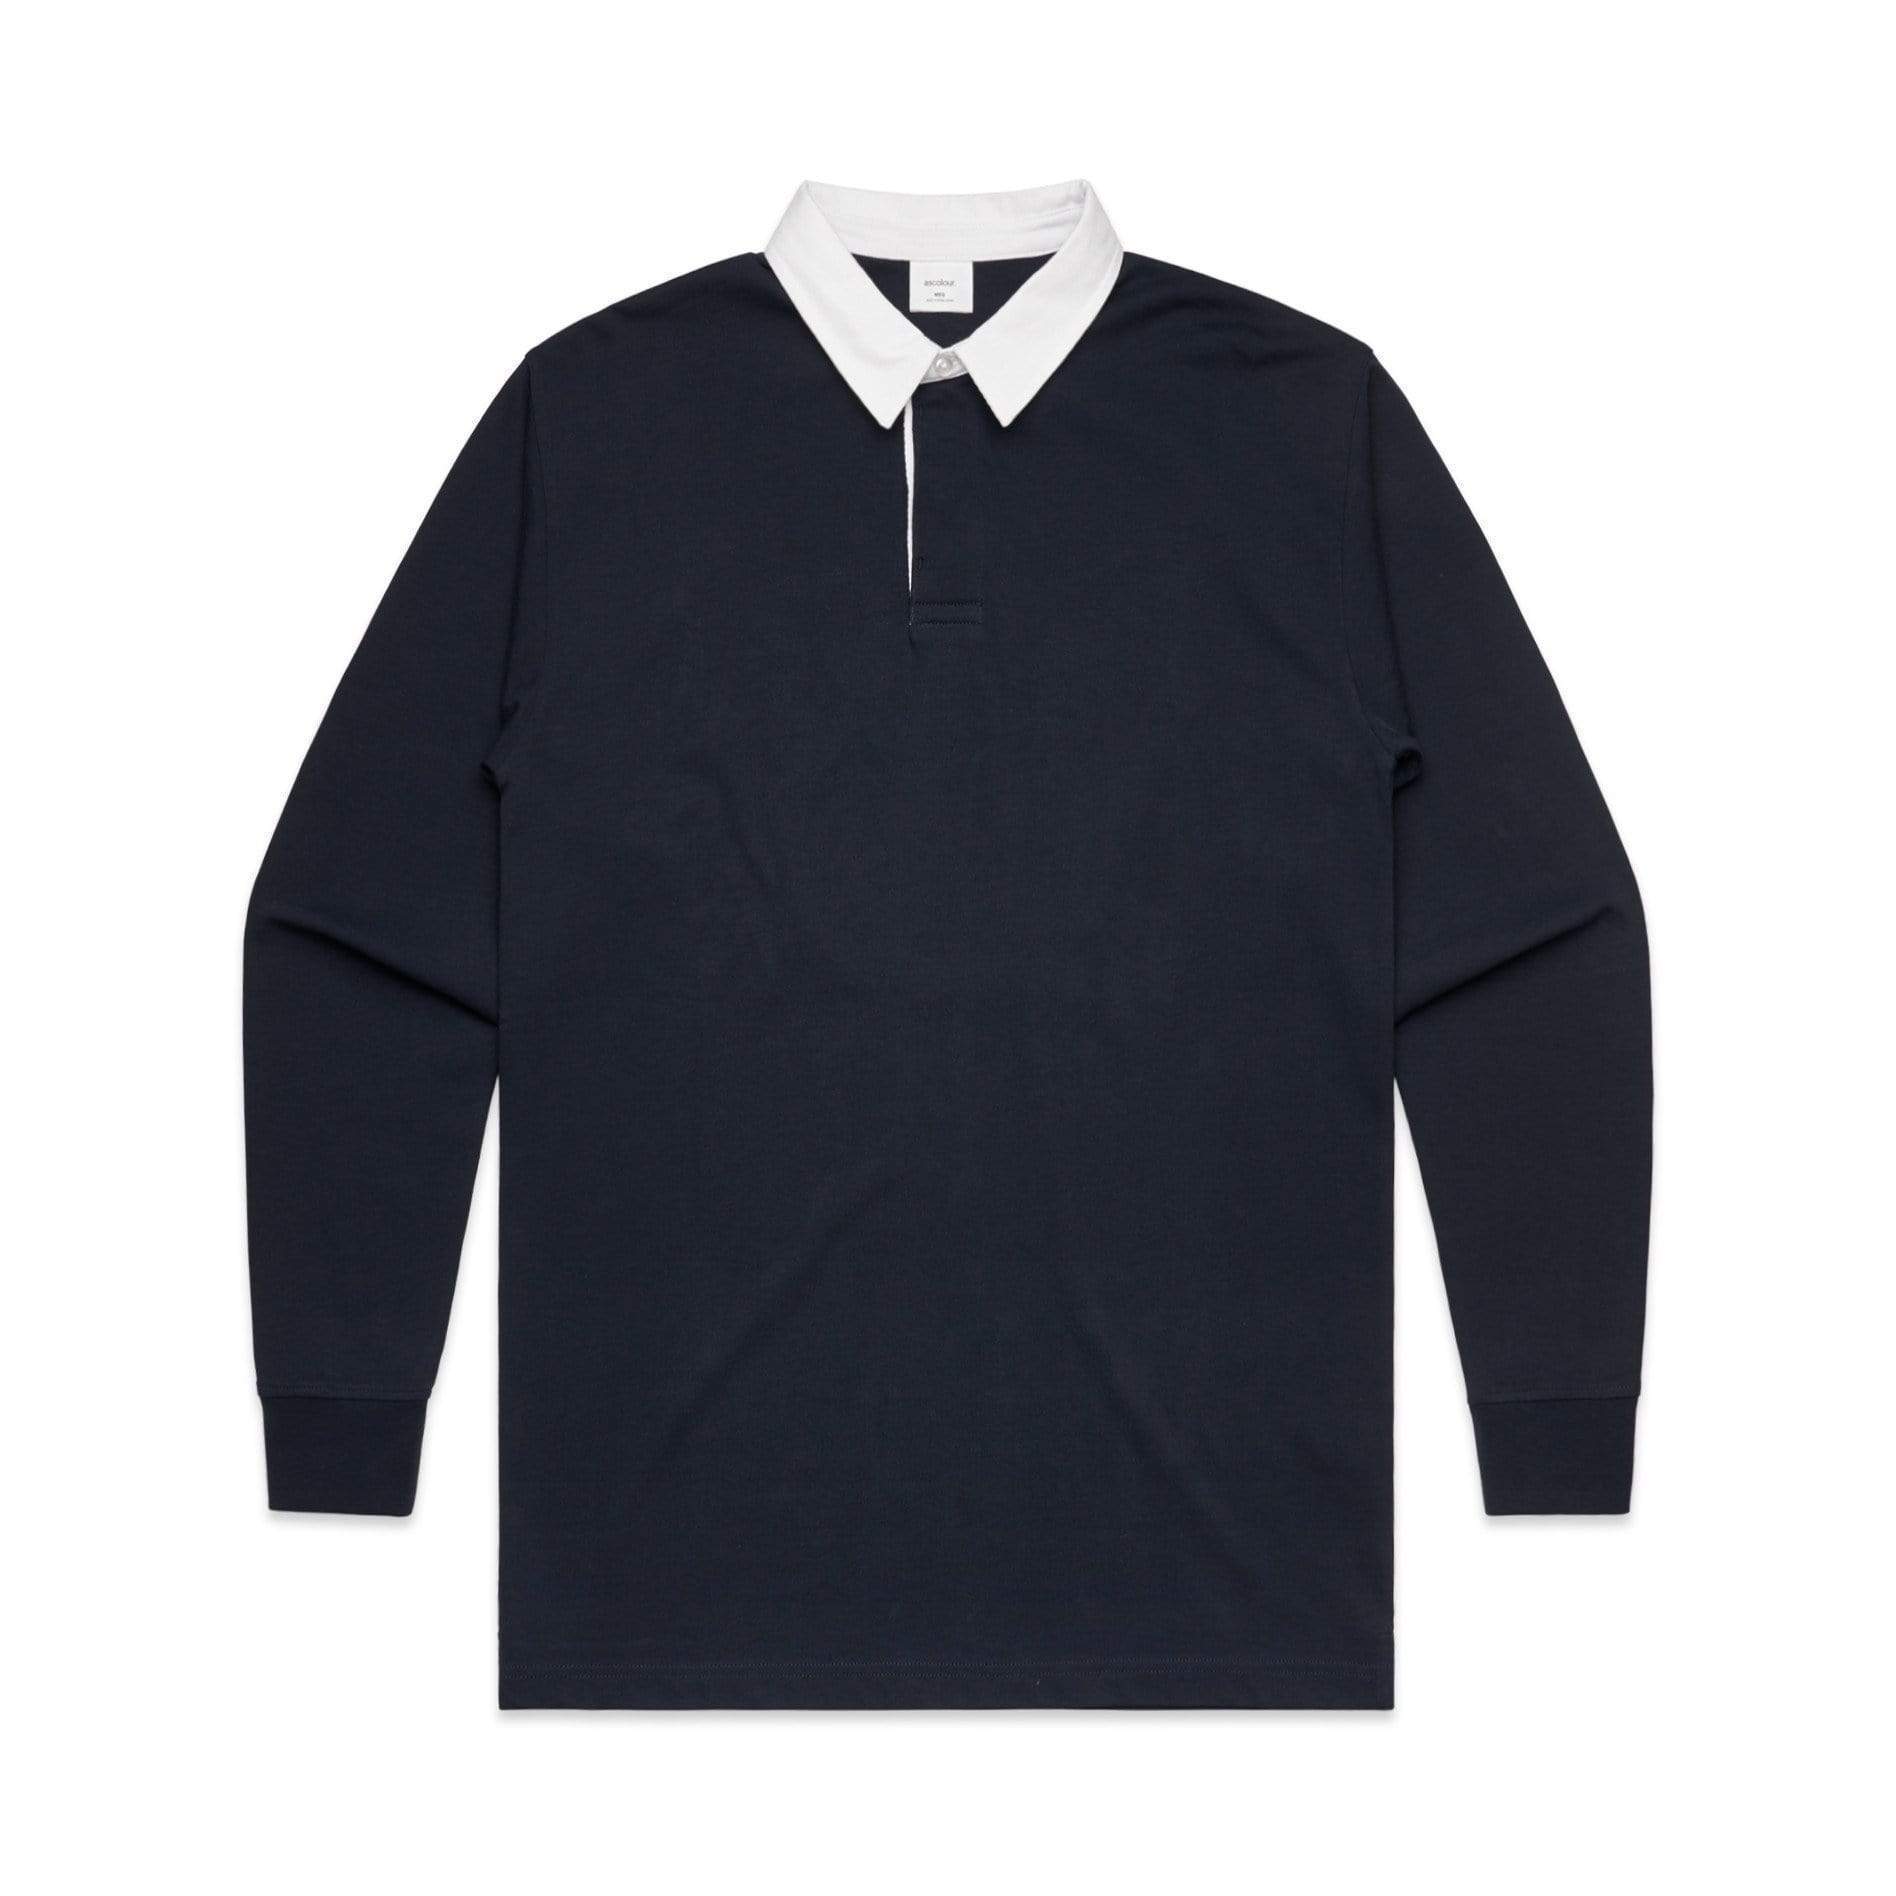 As Colour Casual Wear NAVY / XSM As Colour Men's rugby jersey 5410